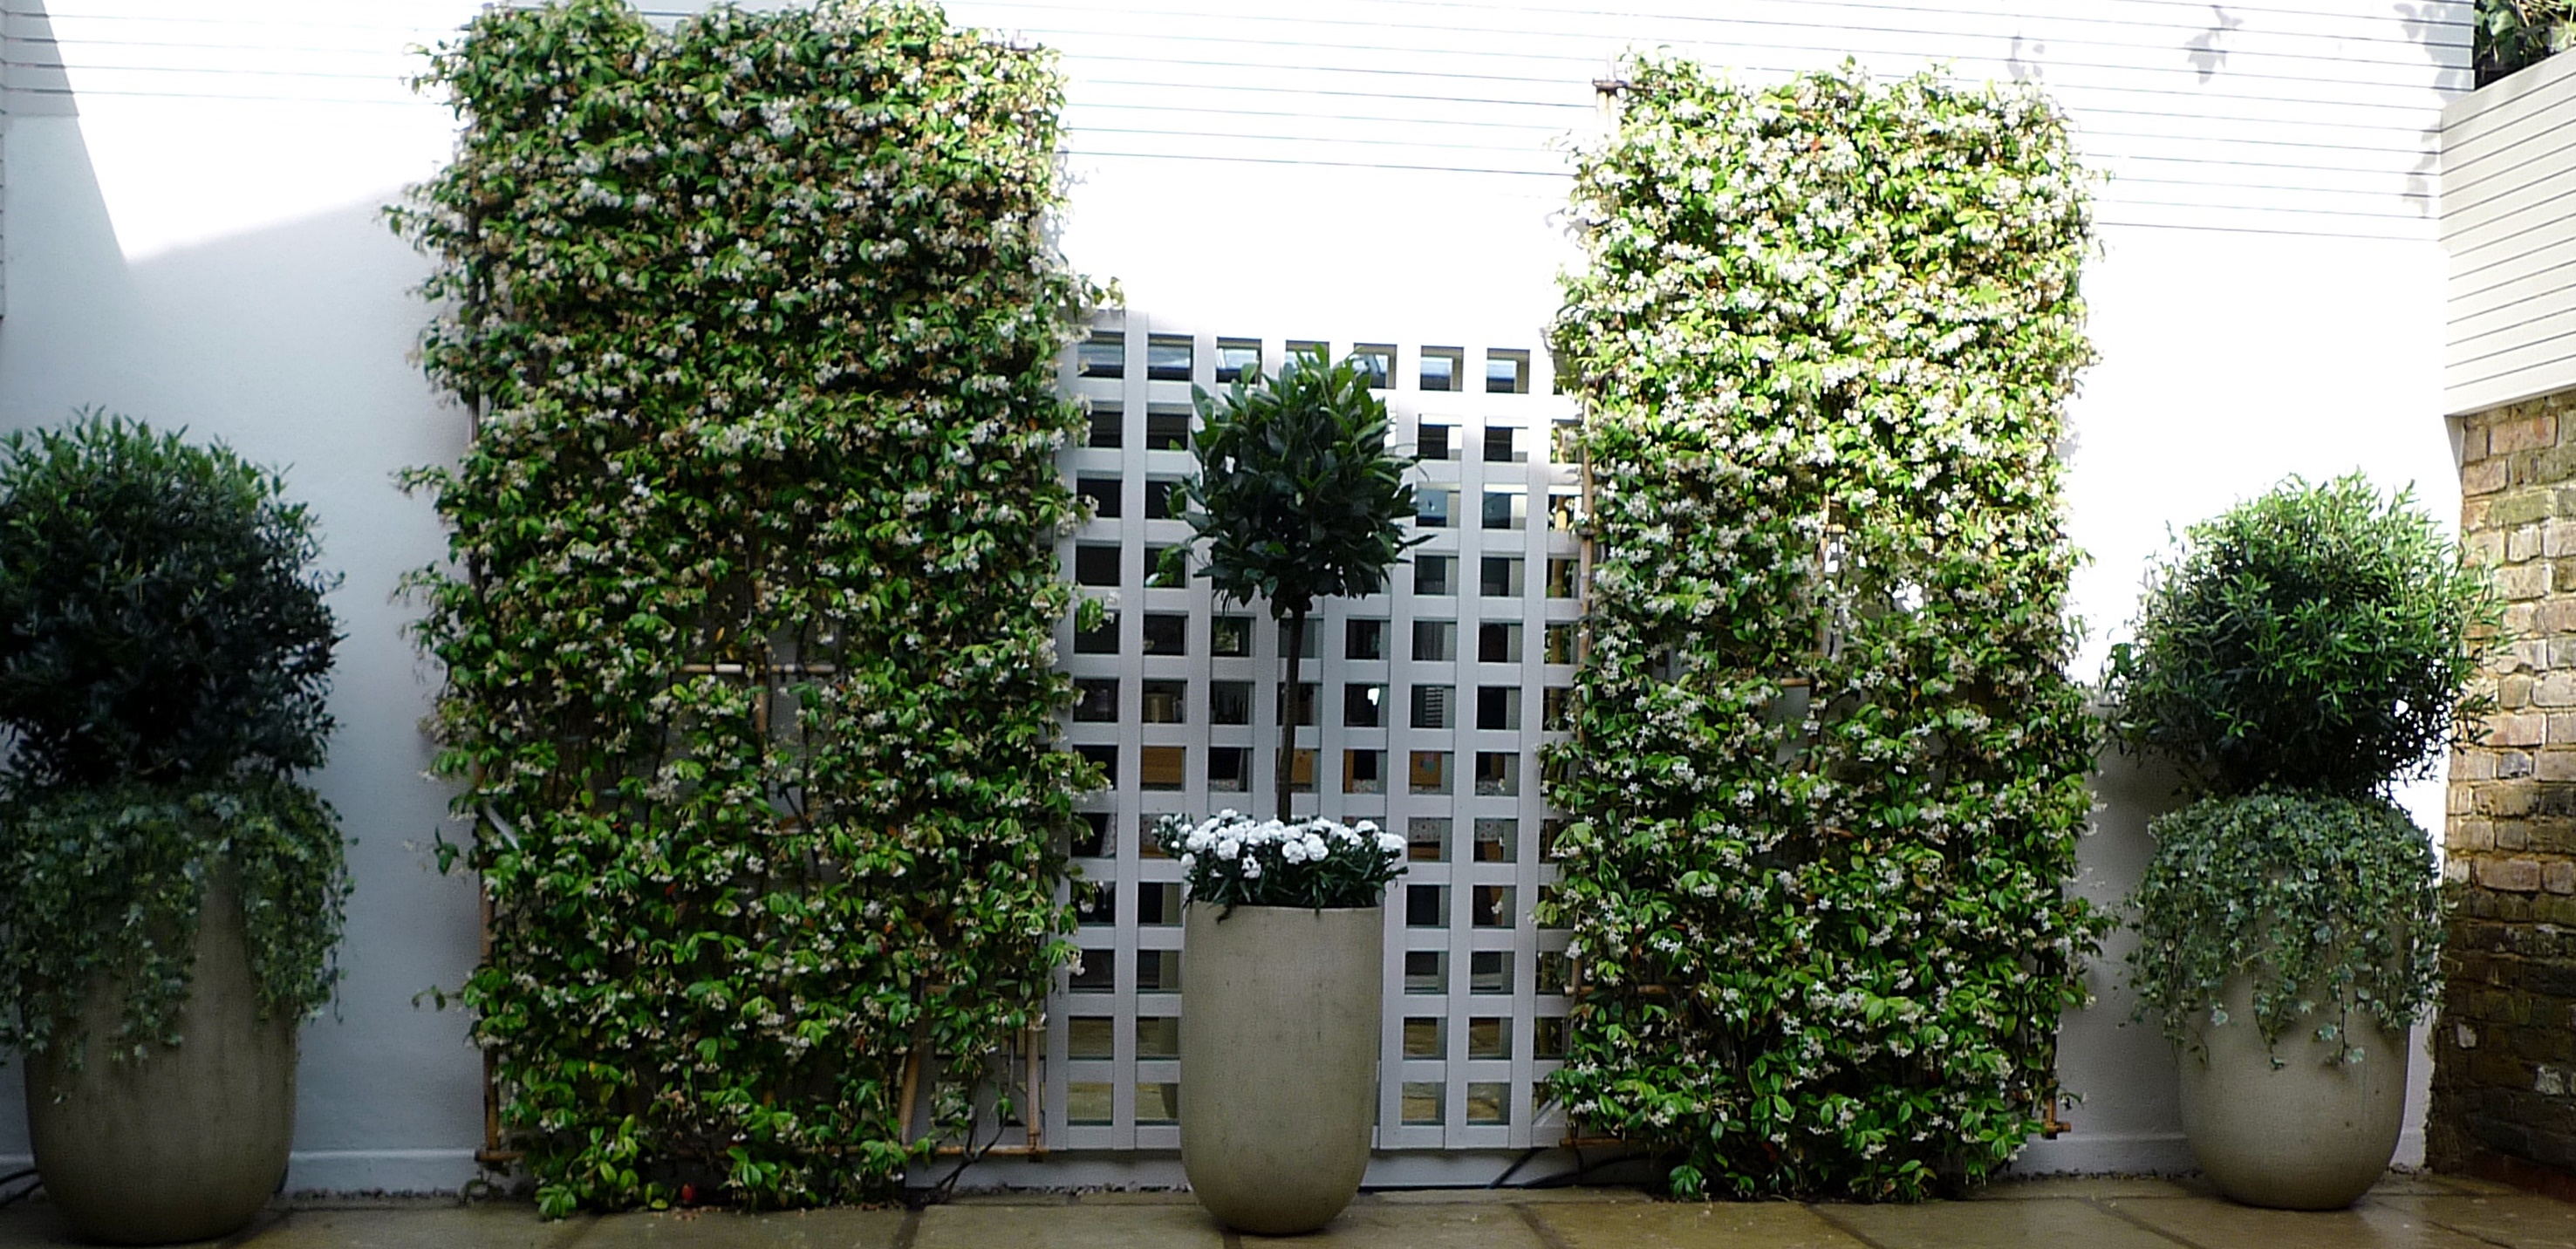 Architectural  low maintenance topiary London Chelsea Fulham planting